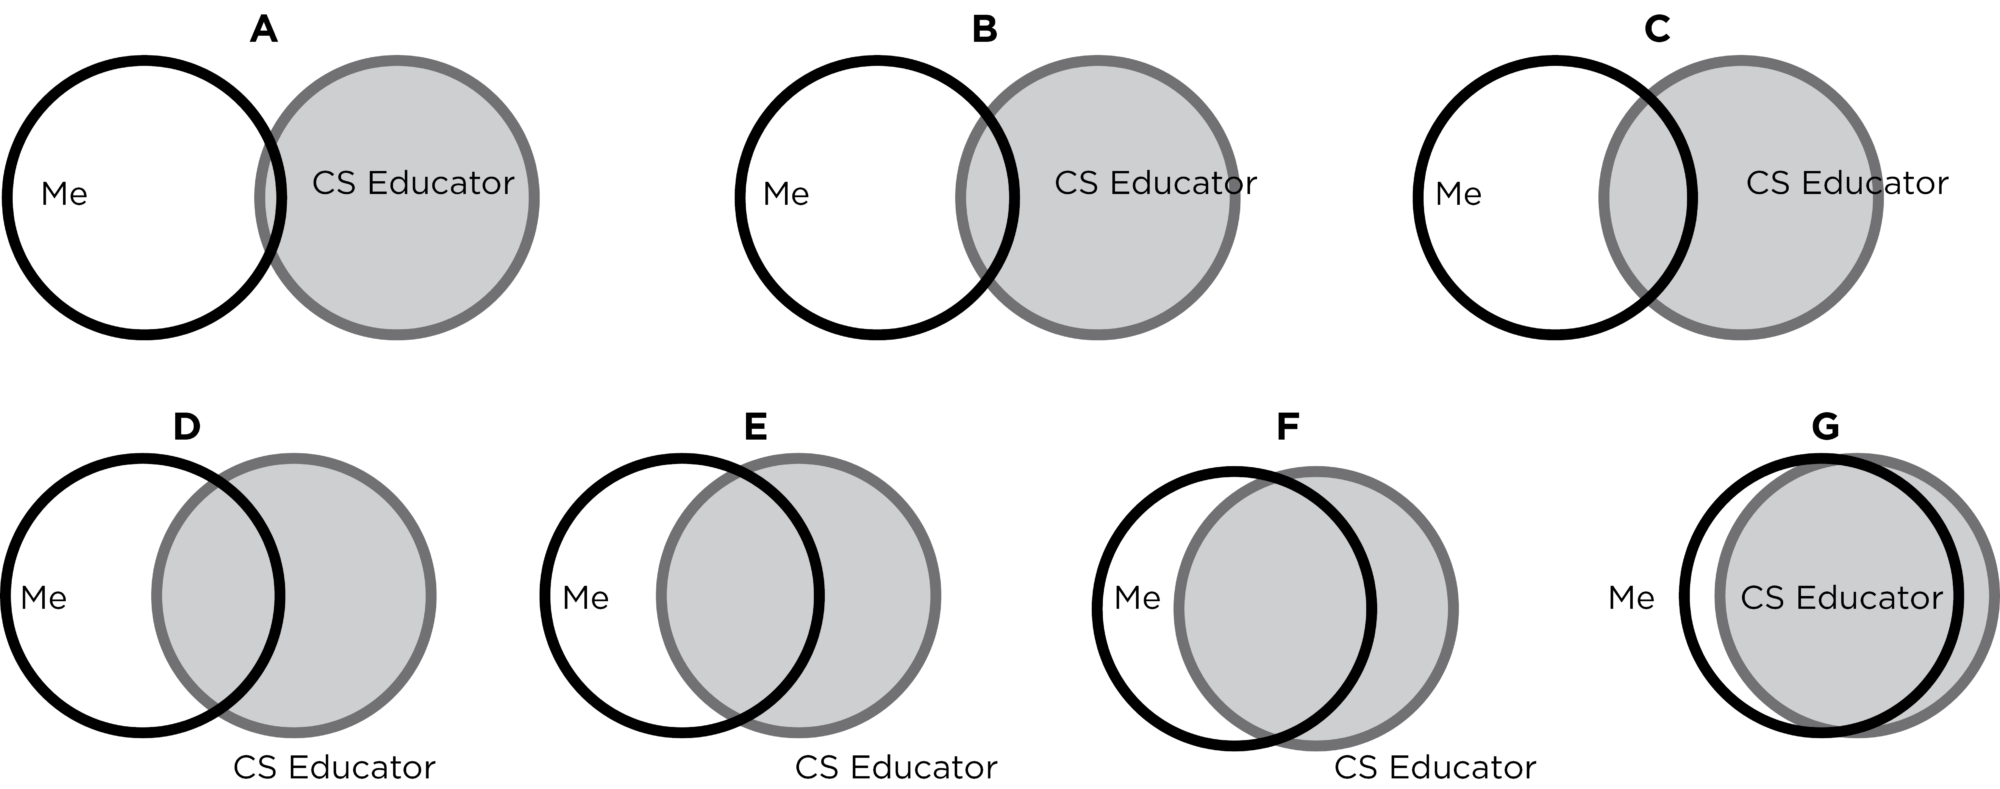 CS educator identification bubbles A (lowest) to G (highest)